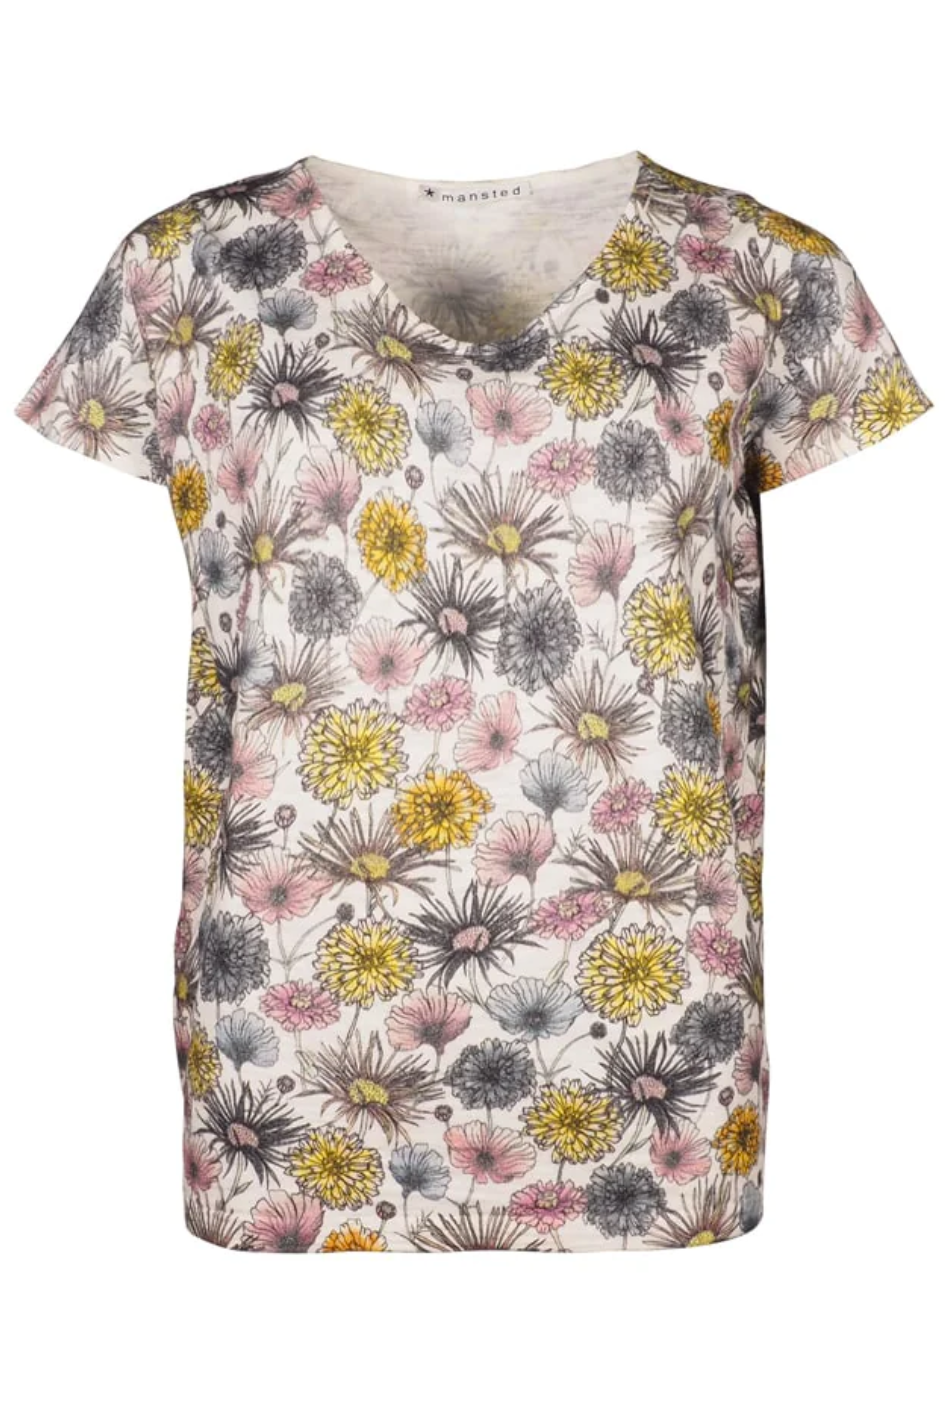 Mansted Denmark Quilla Floral Print Top in Black